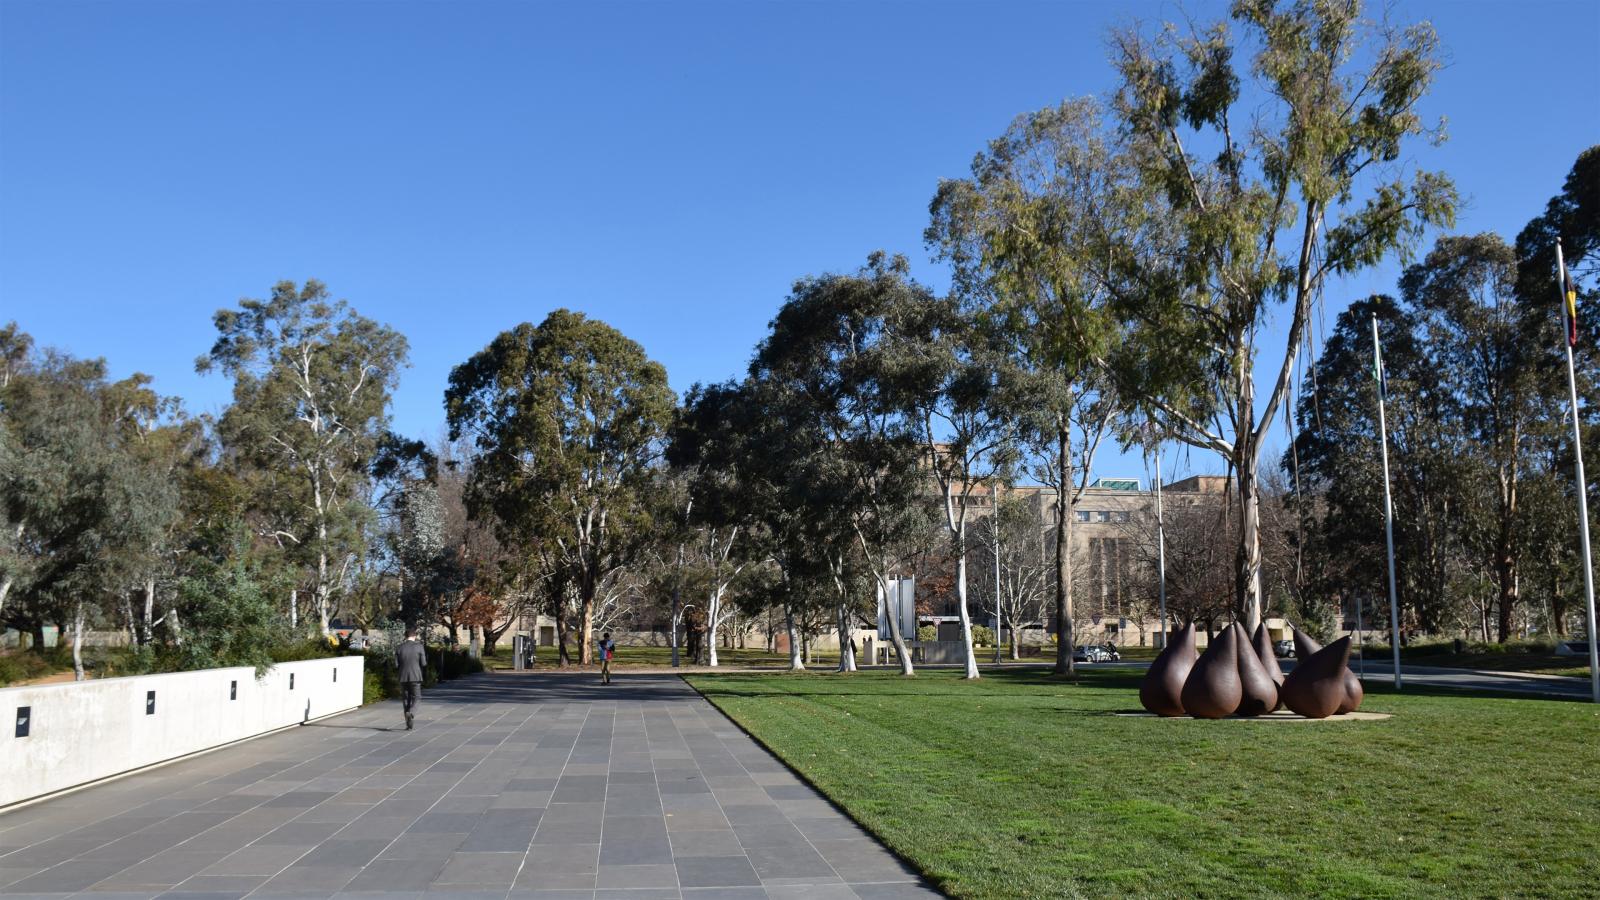 A paved pathway flanked by greenery leads into the Australian Garden at the NGA, with tall trees under a clear blue sky. Artwork resembling large teardrops stands on the grass to the right. A few buildings can be seen in the background amid the foliage.